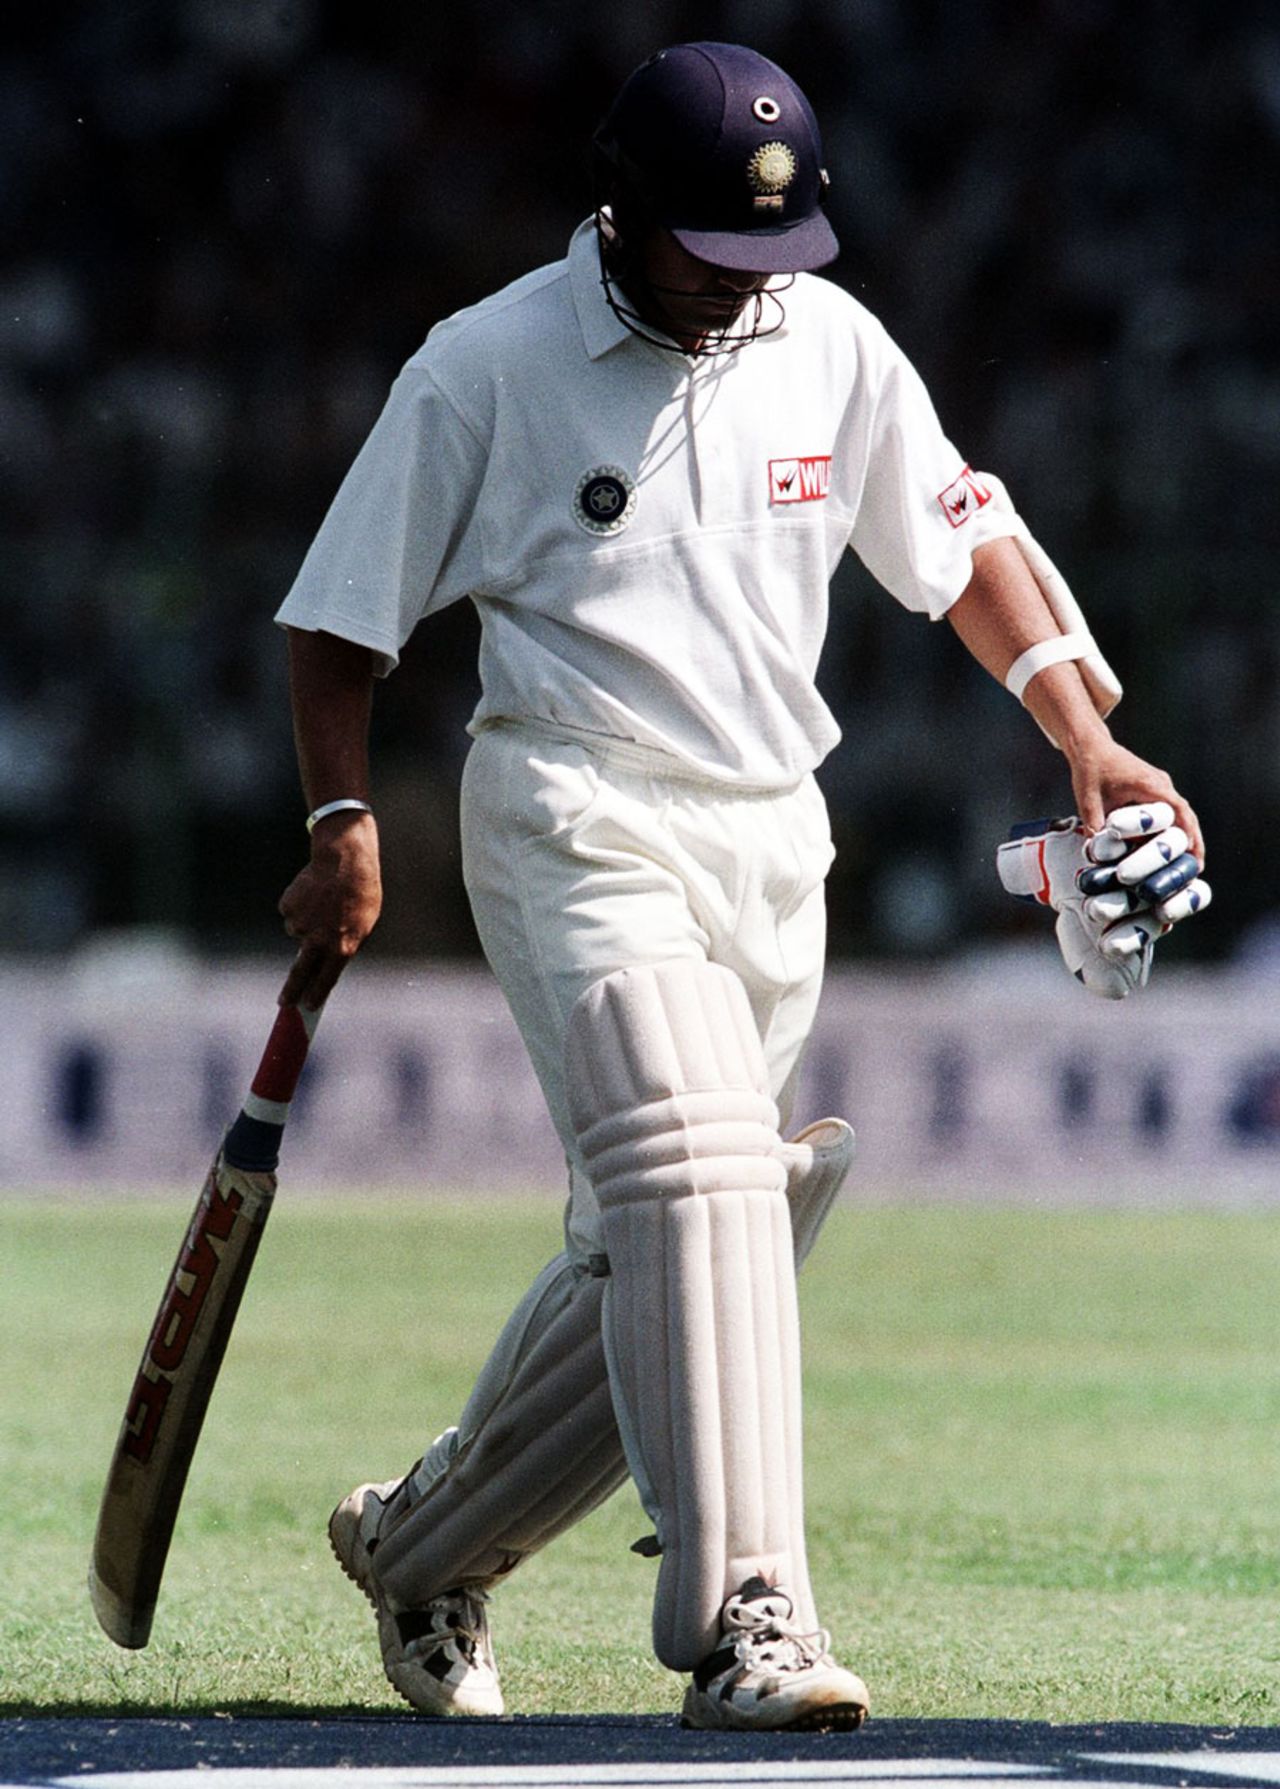 Sachin Tendulkar walks back after being dismissed, India v Pakistan, first Test, day two, Chennai, January 28, 1999